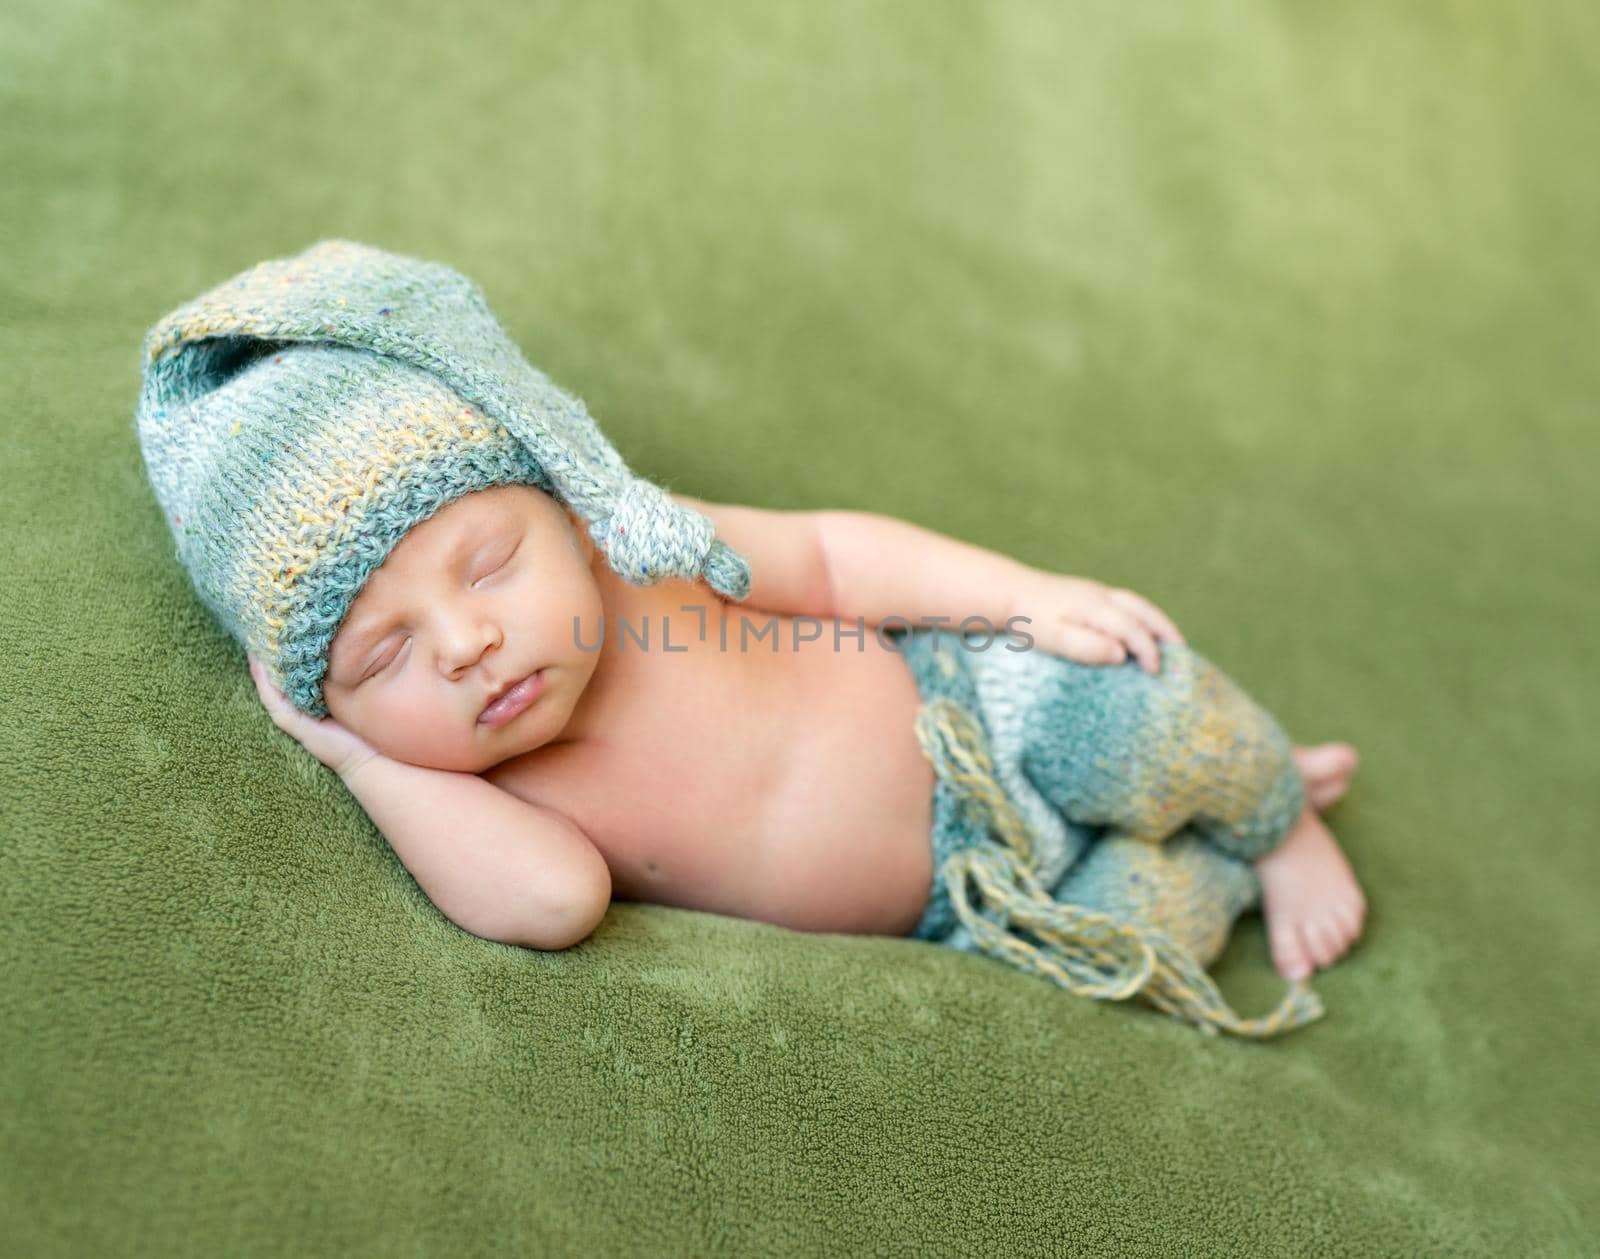 lovely newborn baby in knitted hat and panties sleeps curled up, top view